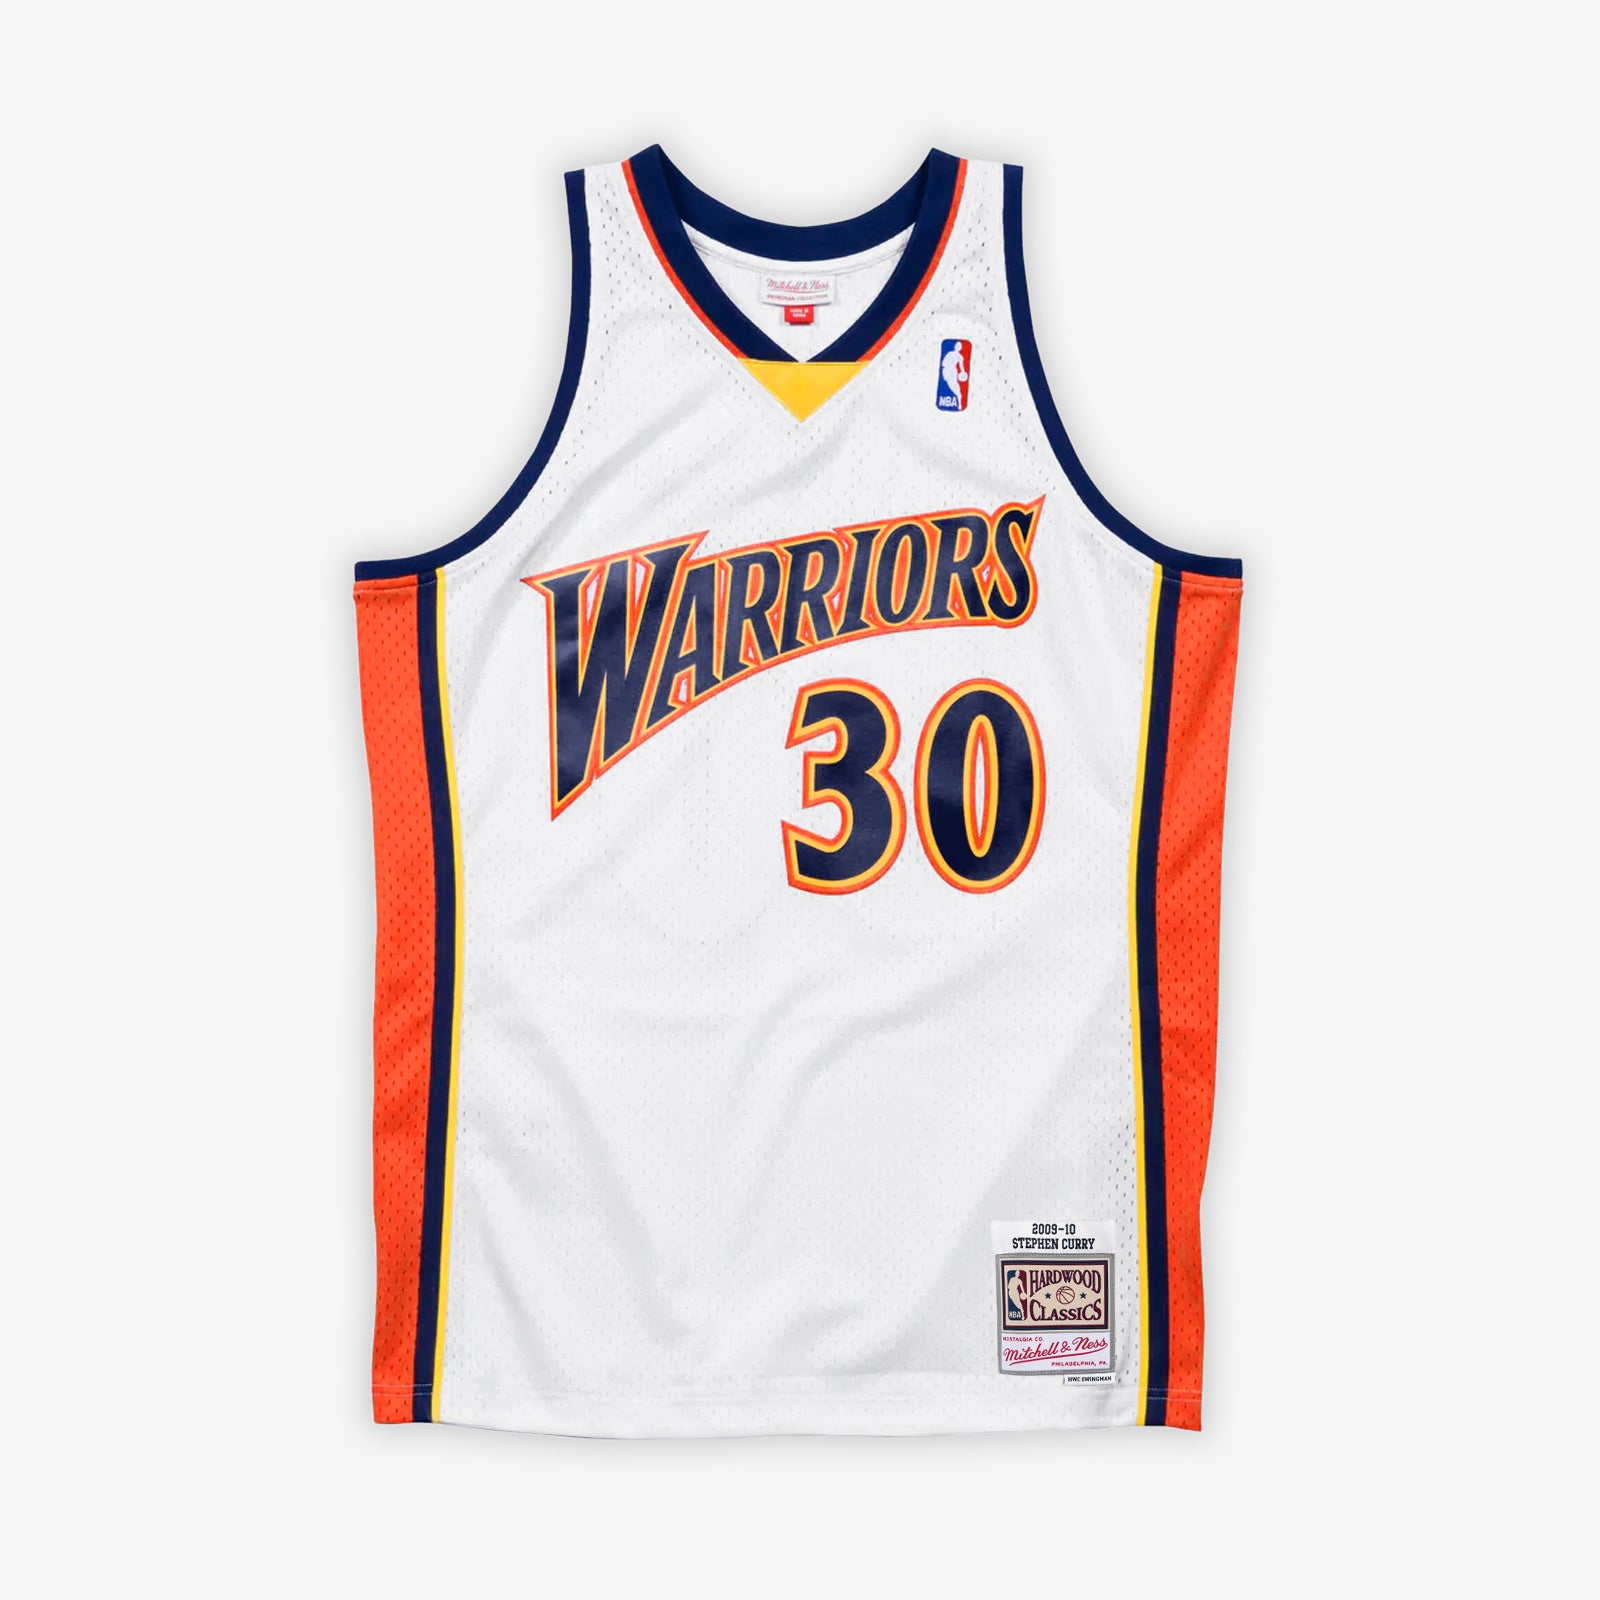 WeBelieve throwback jersey???????????? #curry #steph #stephcurry #stephen  #basketball #bask…